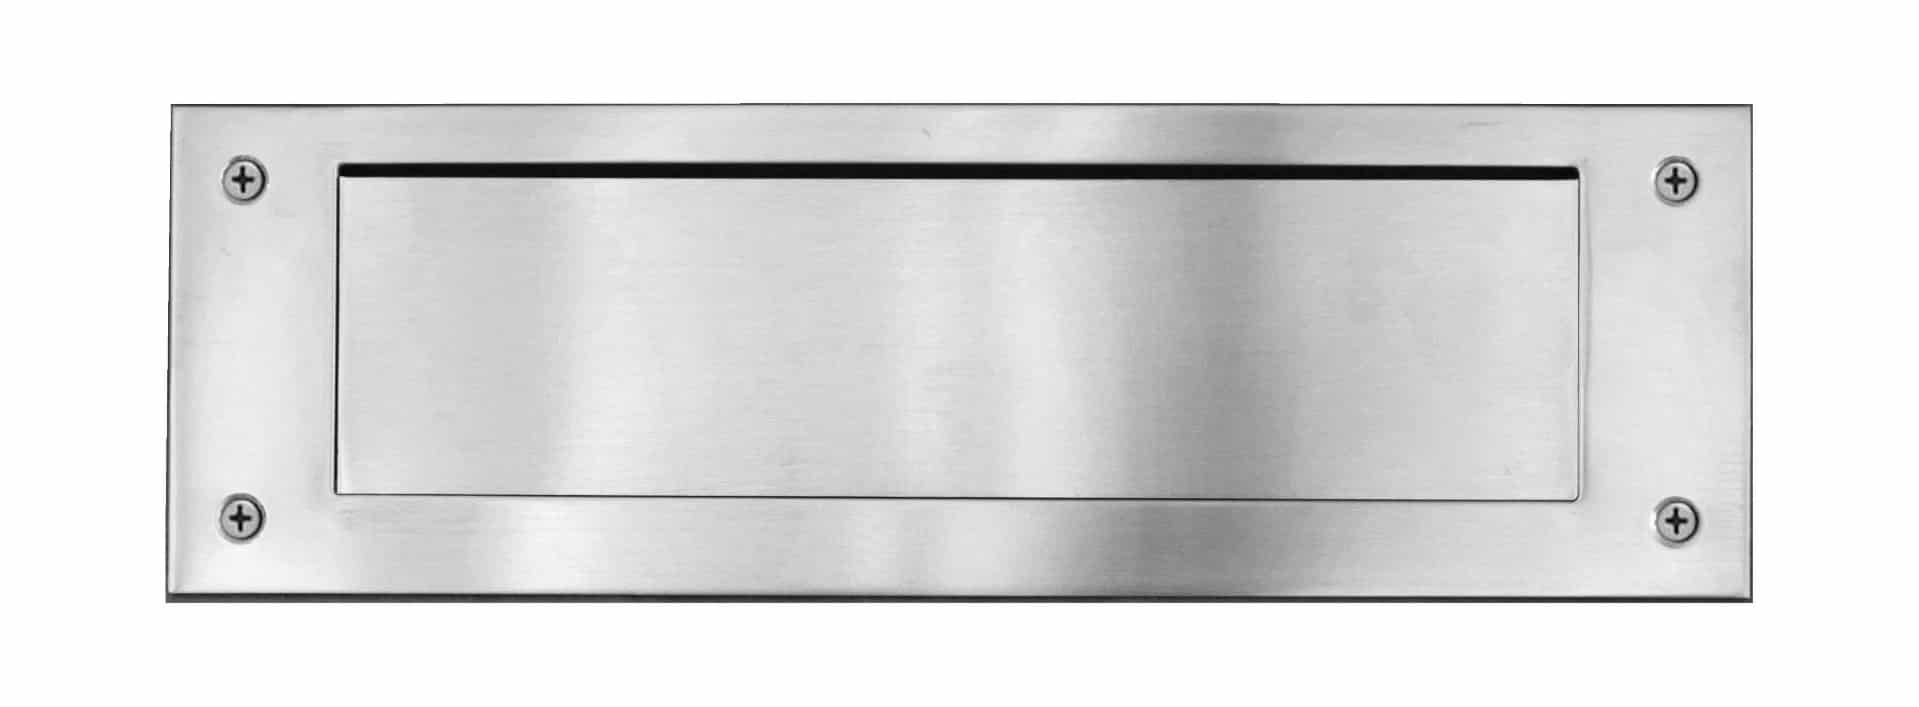 Stainless Steel Mail Slot (rear piece only) Product Image